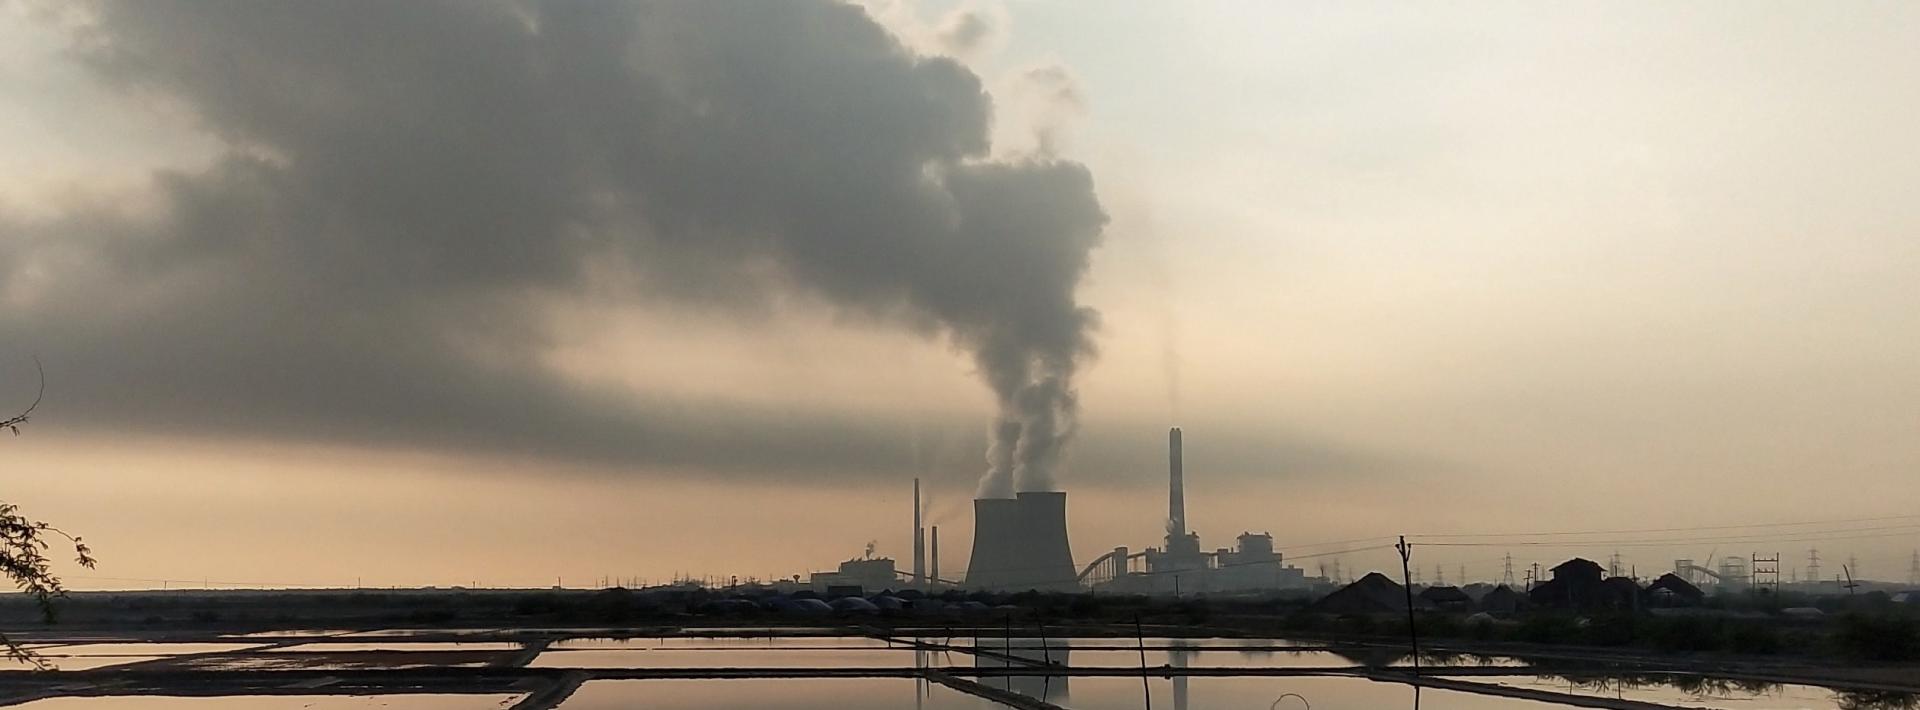 A thermal power plant emits smoke from a chimney.